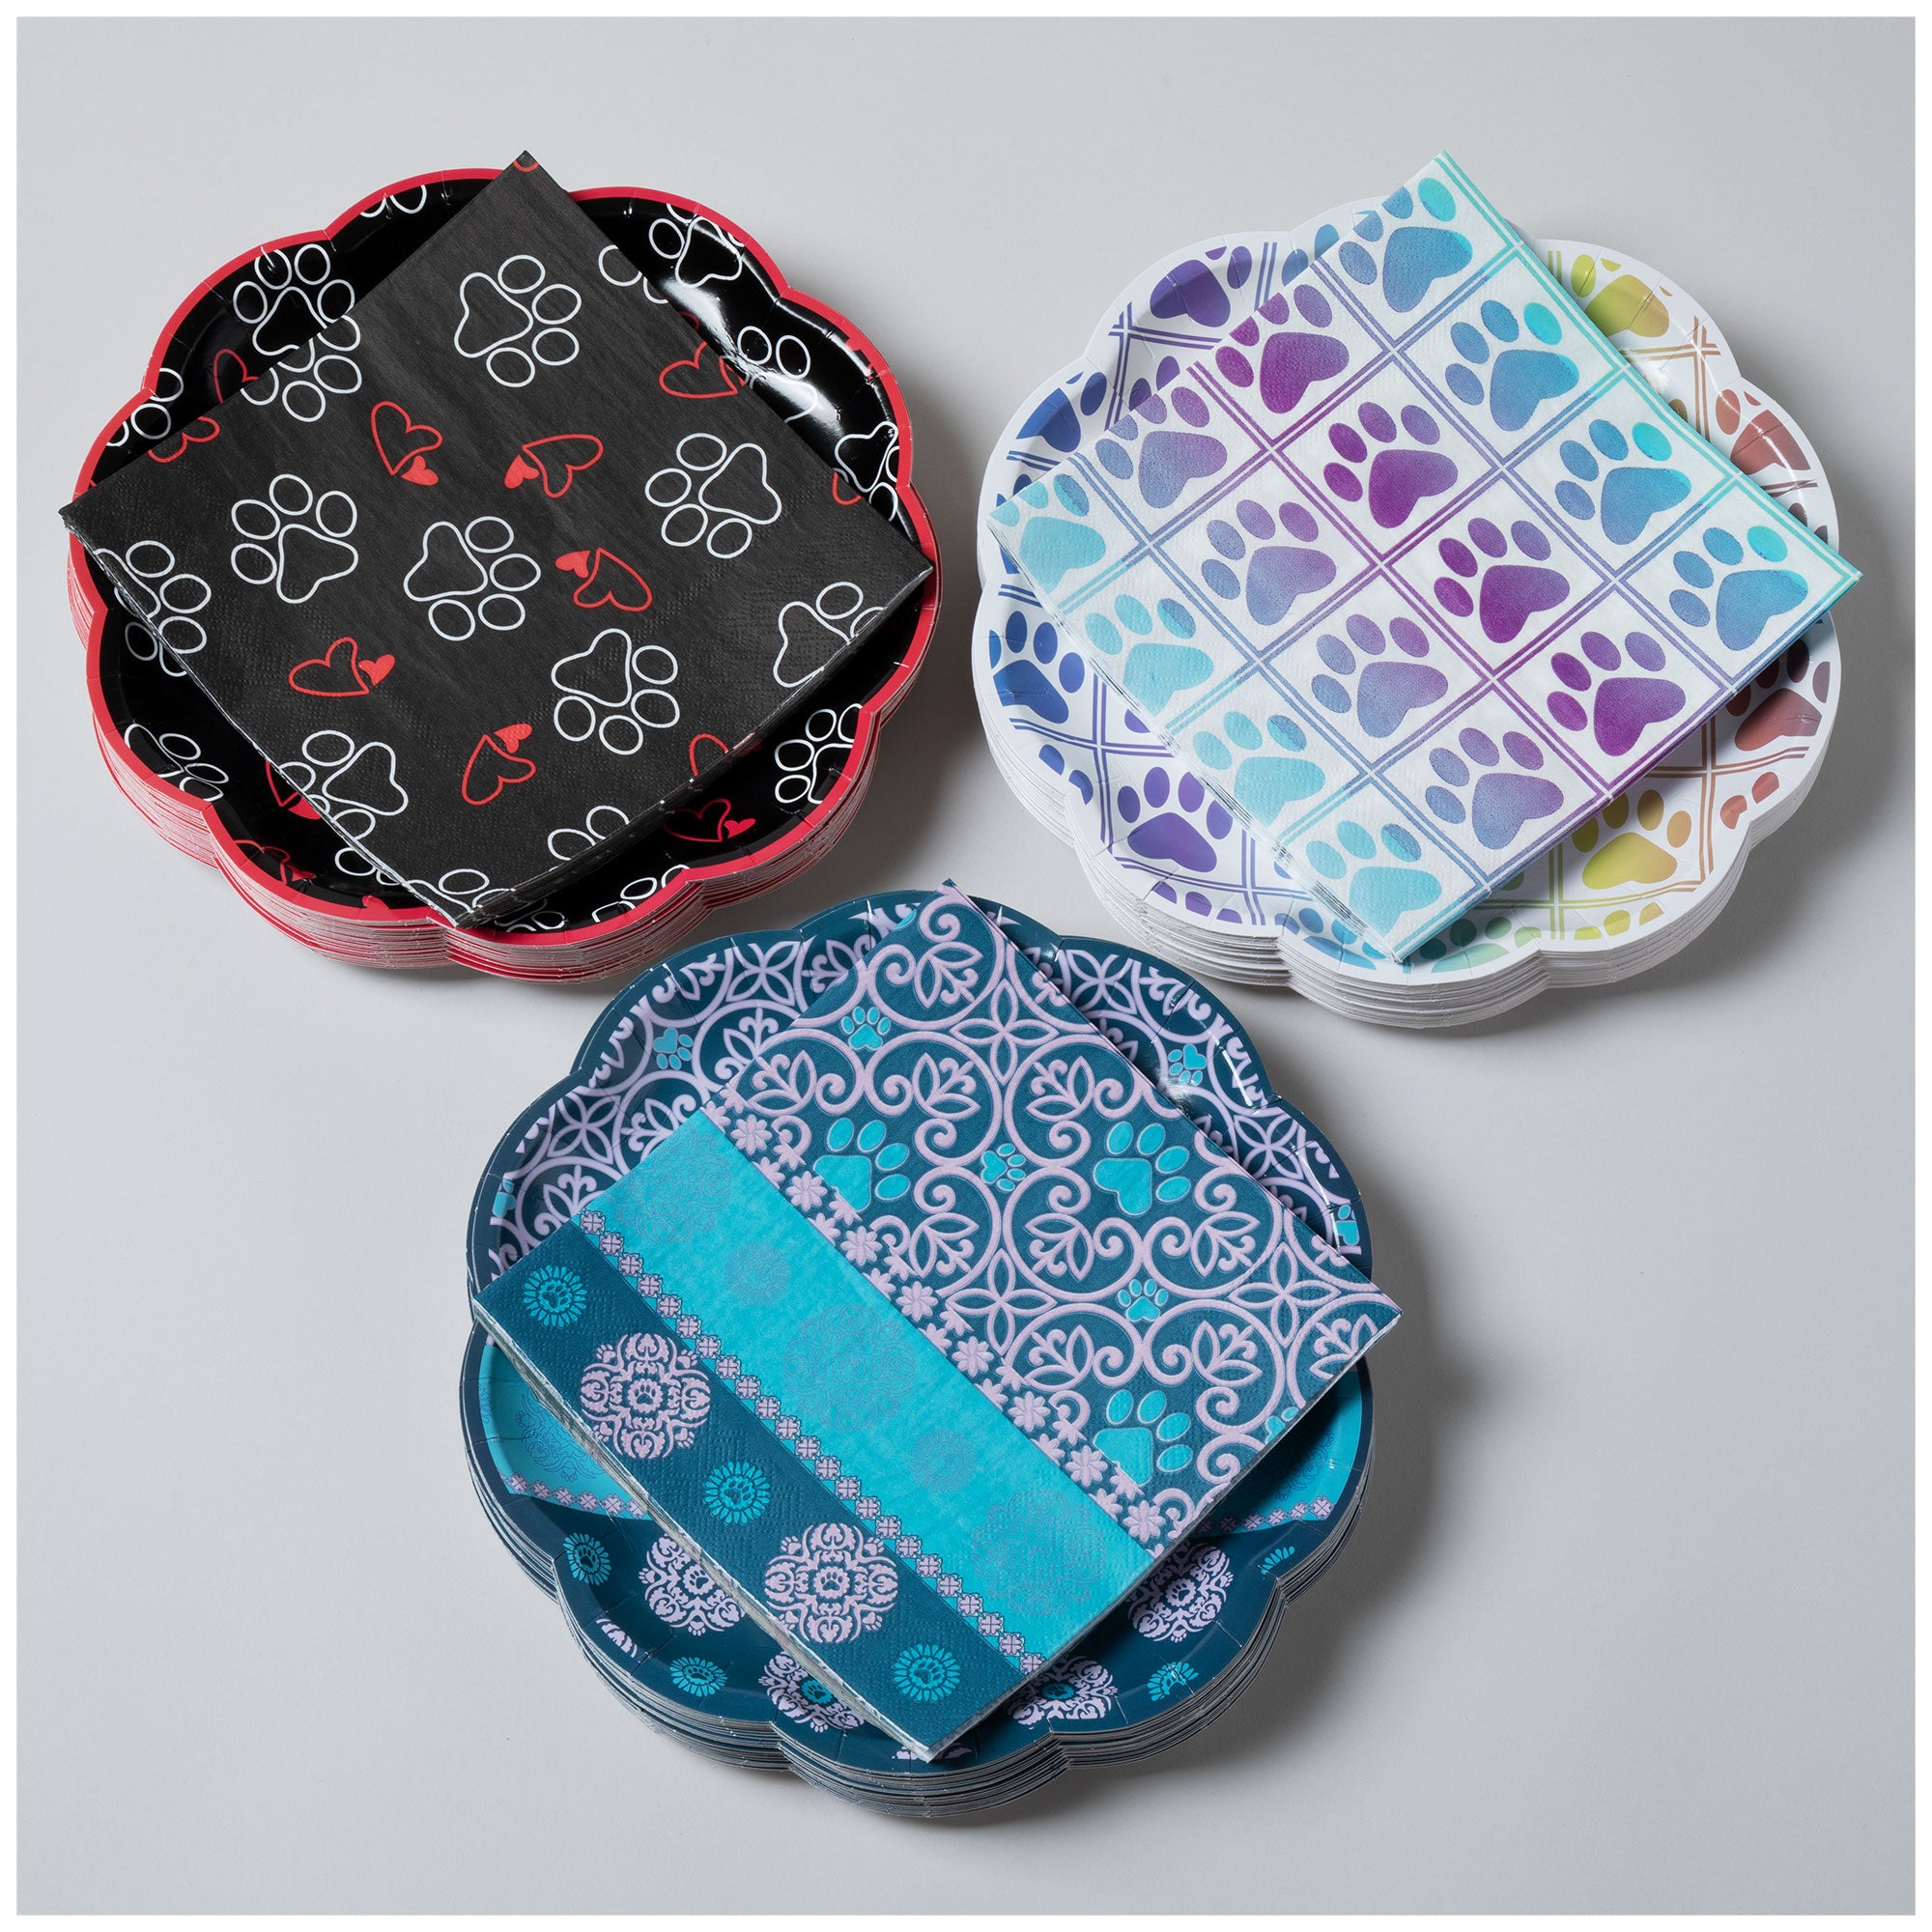 Pawfect Occasion Paper Plates & Napkins - Outlined Paws & Hearts - Napkins & Plates